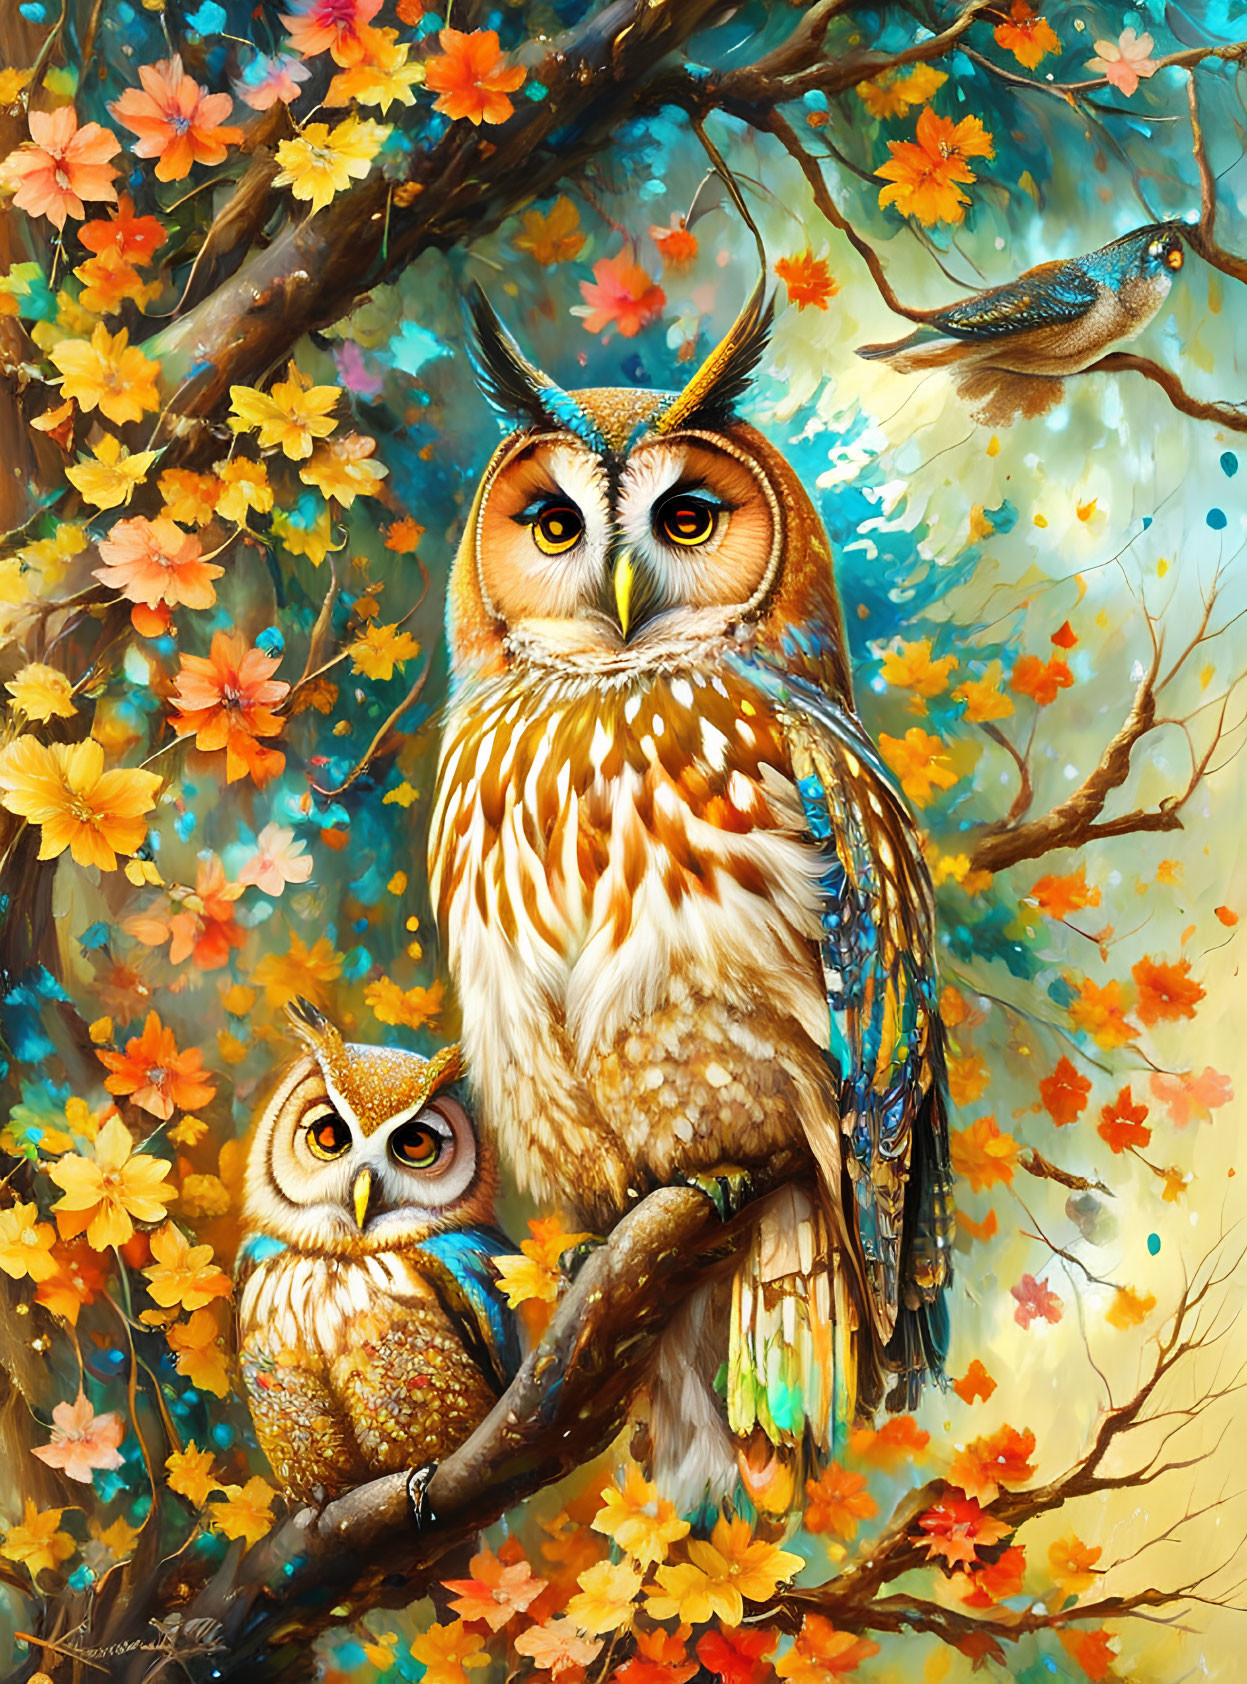 Colorful Owls and Luminous Bird in Magical Forest Scene